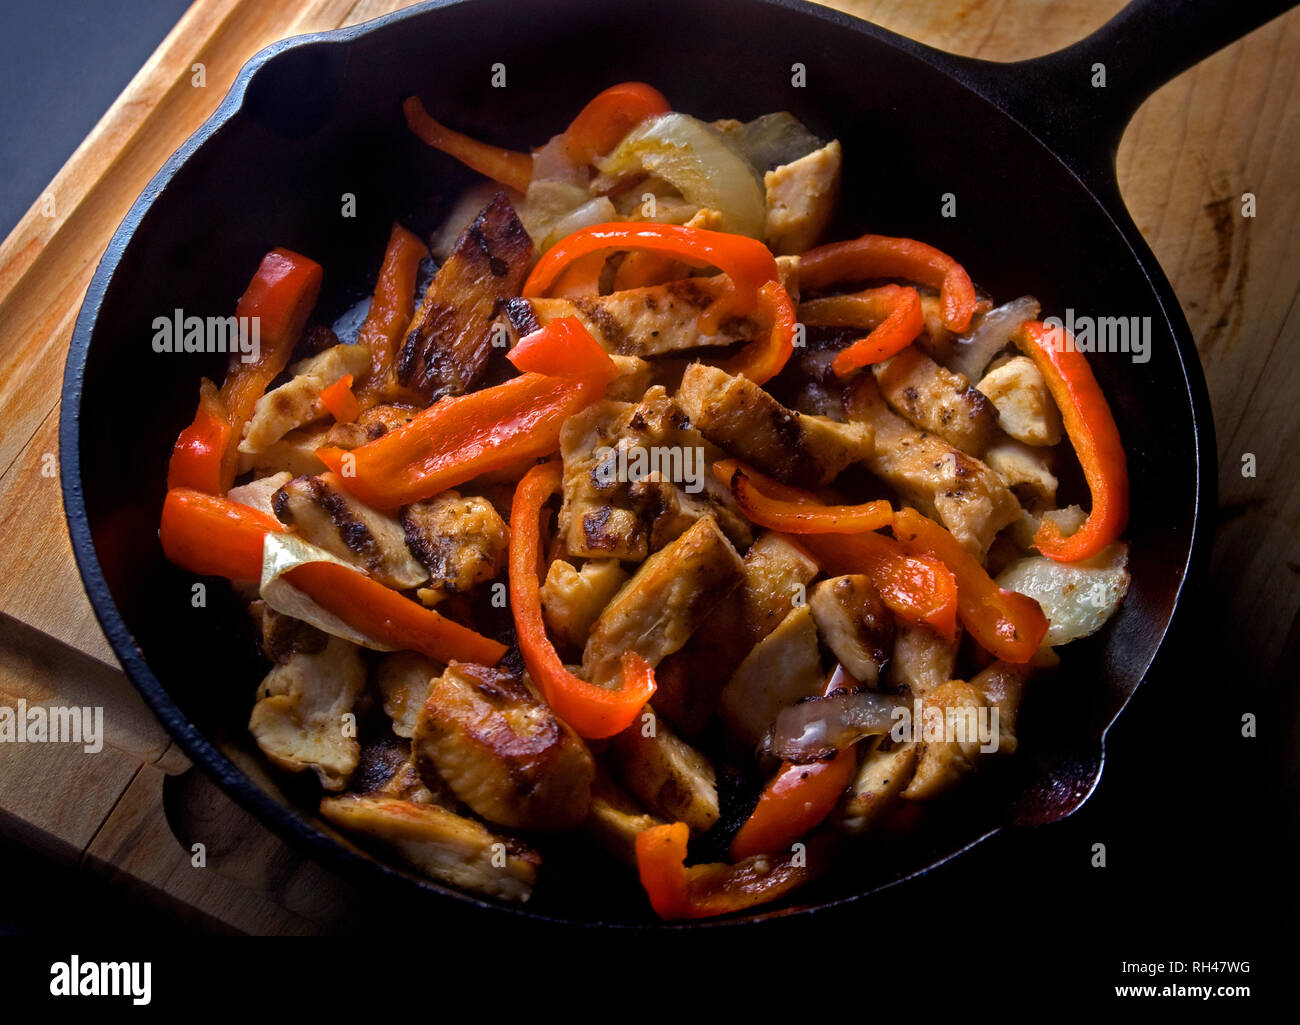 Boneless, skinless chicken is stir-fried with red and orange bell peppers and served in a cast iron skillet. Stock Photo